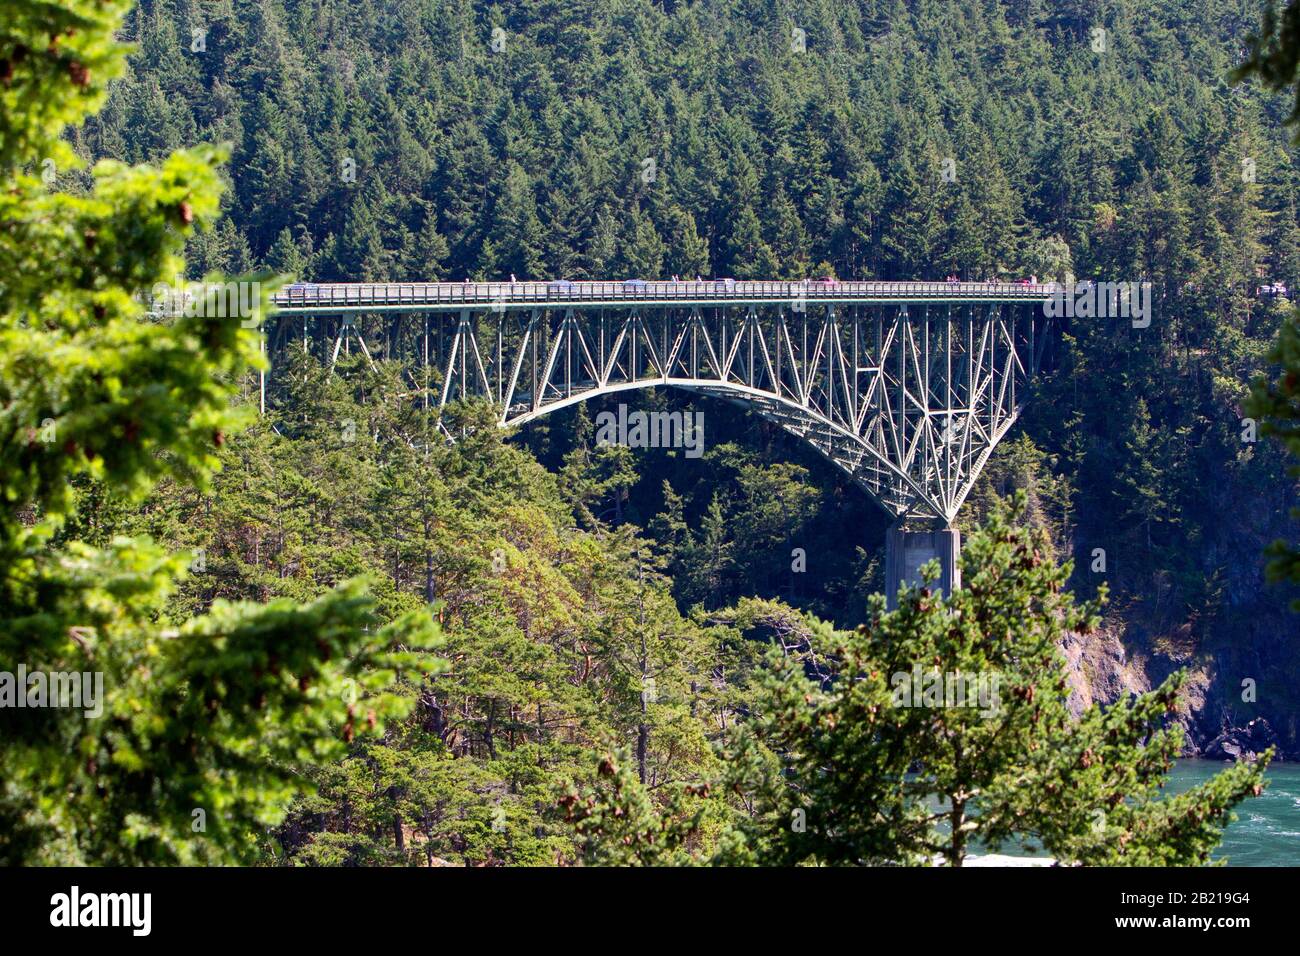 A scenic view of the Deception Pass Bridge on Washington State Route 20 connecting Whidbey Island to Fidalgo Island in the US state of Washington Stock Photo